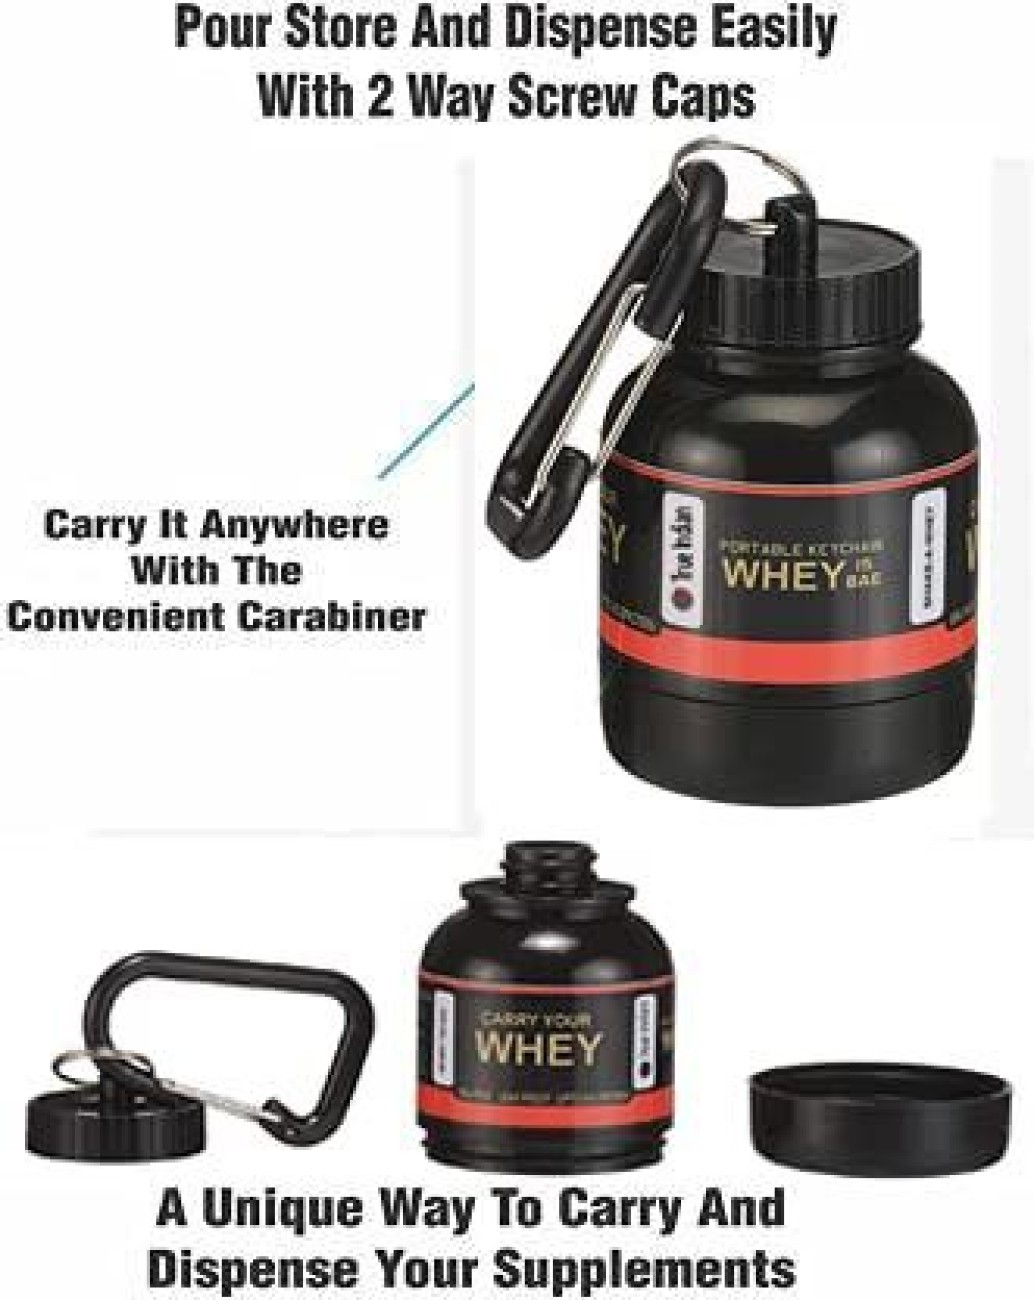 https://rukminim2.flixcart.com/image/1100/1300/l1zc6fk0/shopsy-container/r/o/m/utility-container-portable-protein-funnel-whey-or-supplement-original-imagdfeynjz8wjd3.jpeg?q=90